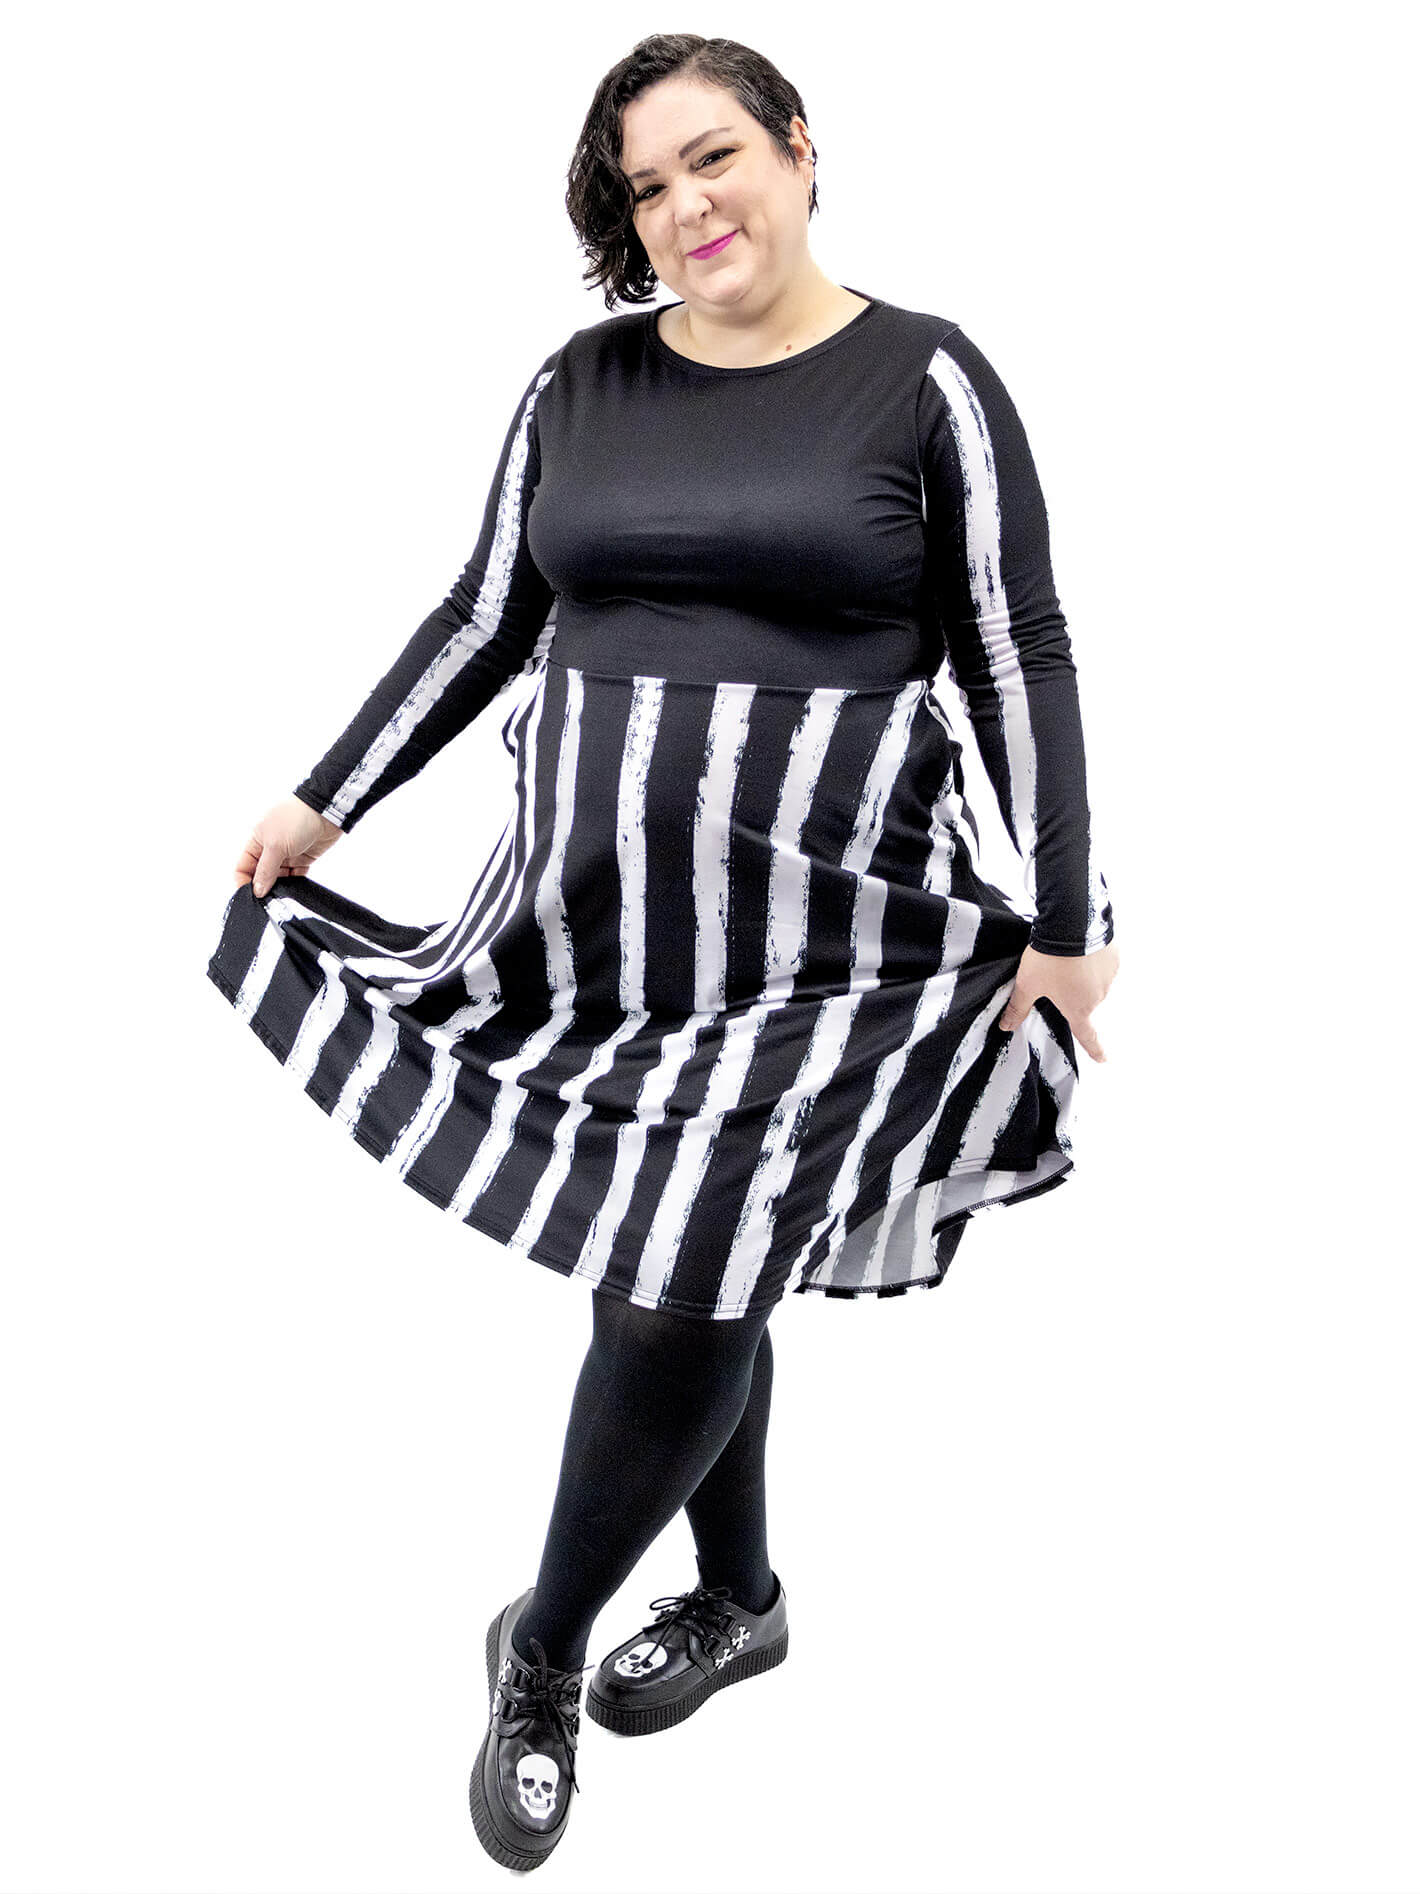 Distressed gothic plus size dress with pockets.